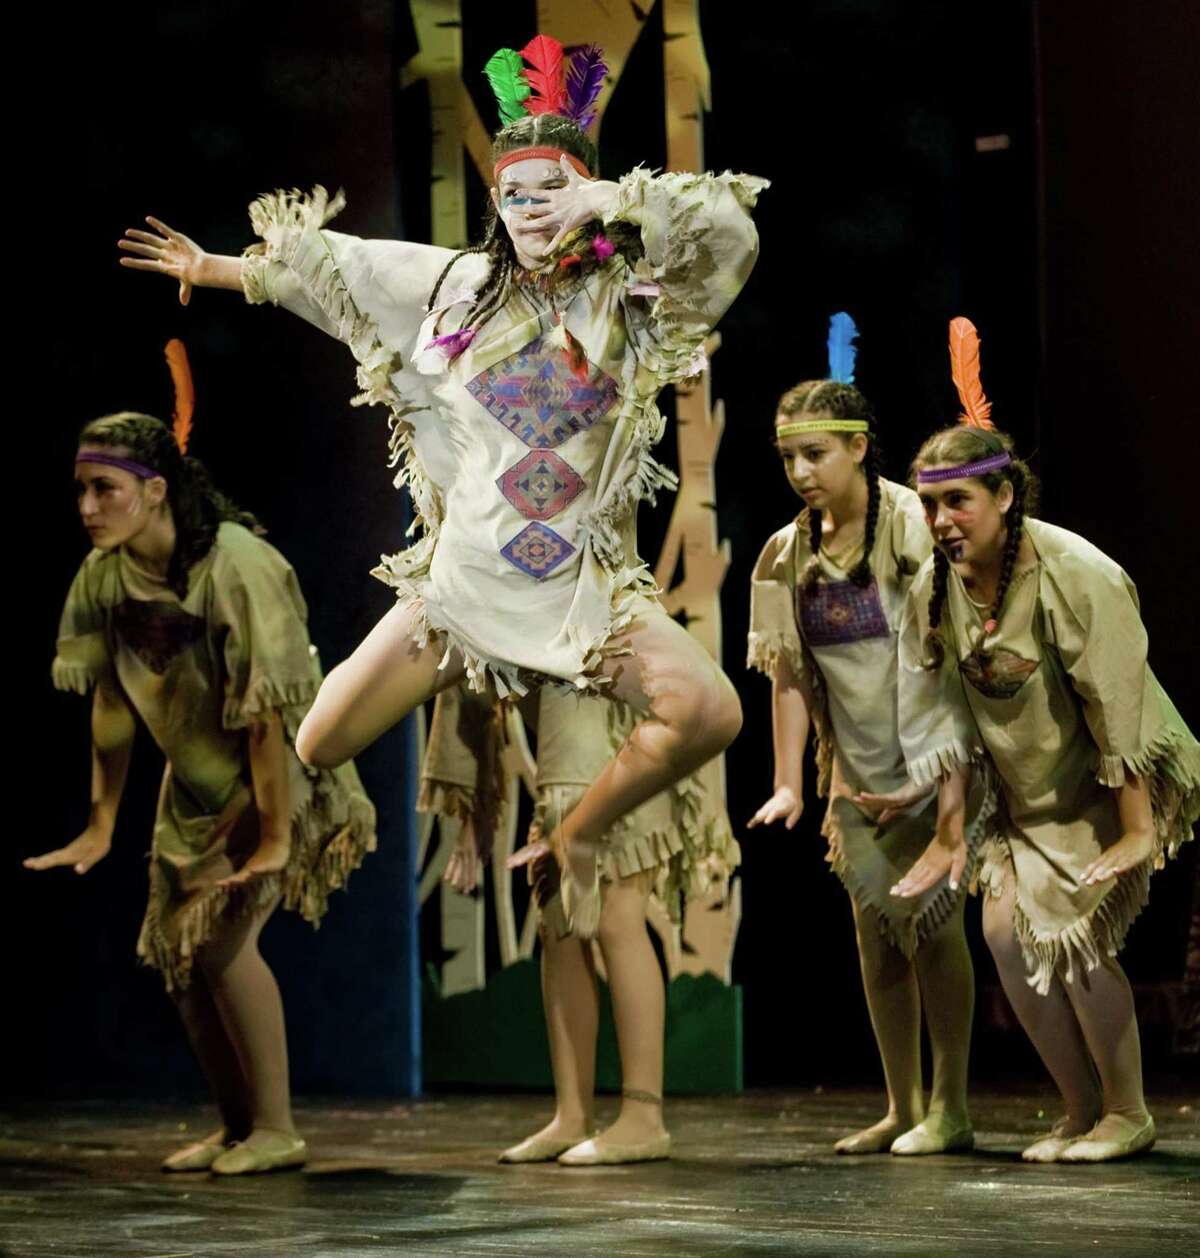 Skye Gillespie as Tiger Lily in Curtain Call’s play Peter Pan at the Sterling Farms Theater Complex in Stamford, Conn., in August 2016. Curtain Call raised more than $80,000 on the 2017 installment of Giving Day on Thursday, March 9, topping all southwestern Connecticut nonprofits which received $1.5 million in the aggregate from more than 13,700 donors.